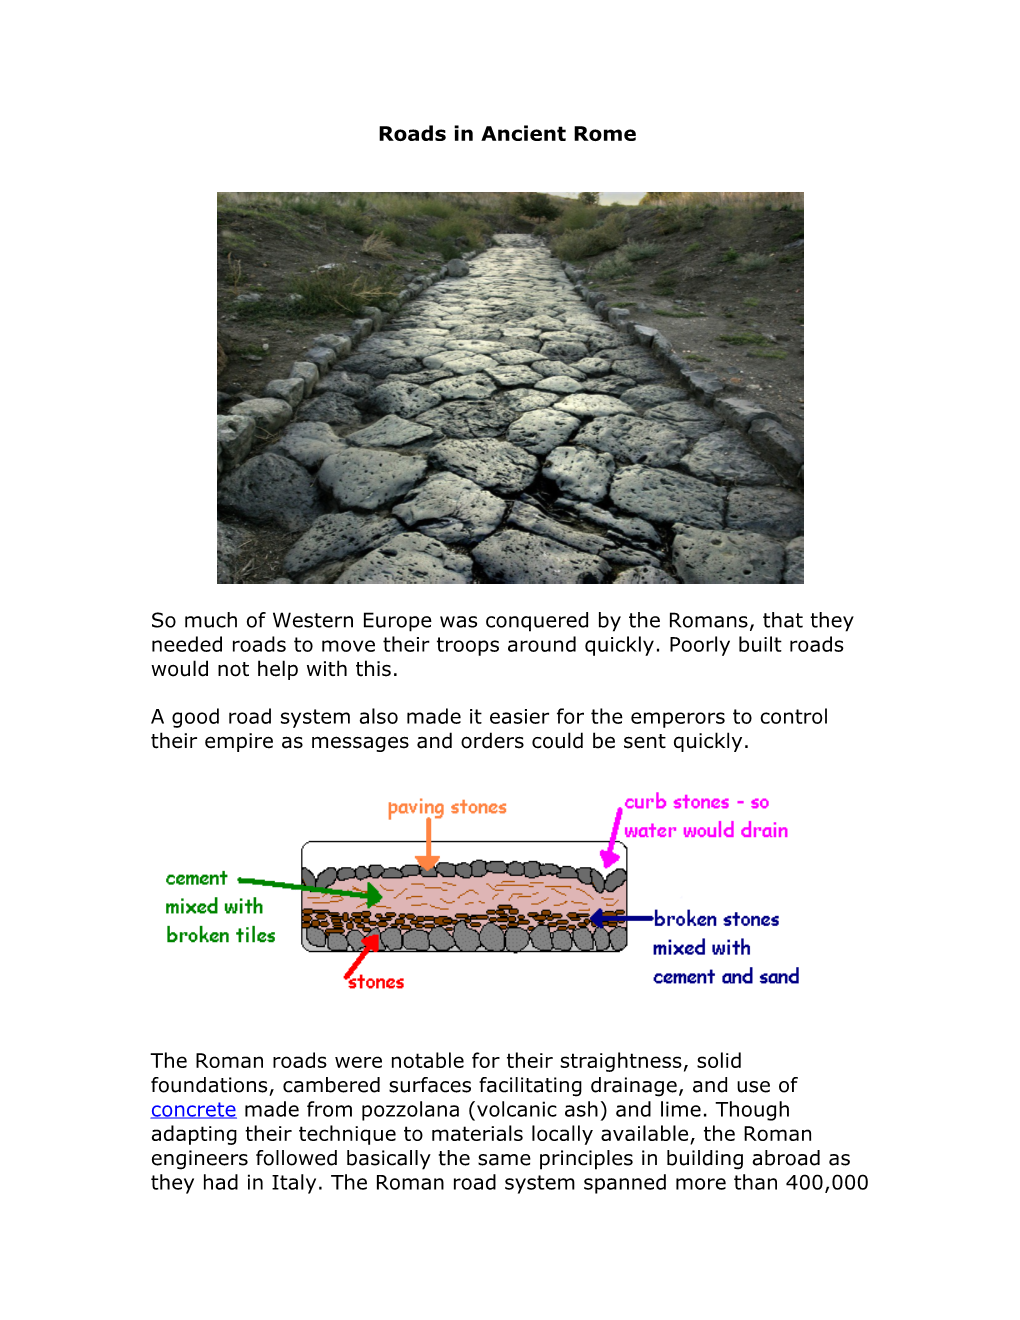 Roman Road System, Outstanding Transportation Network of the Ancient Mediterranean World